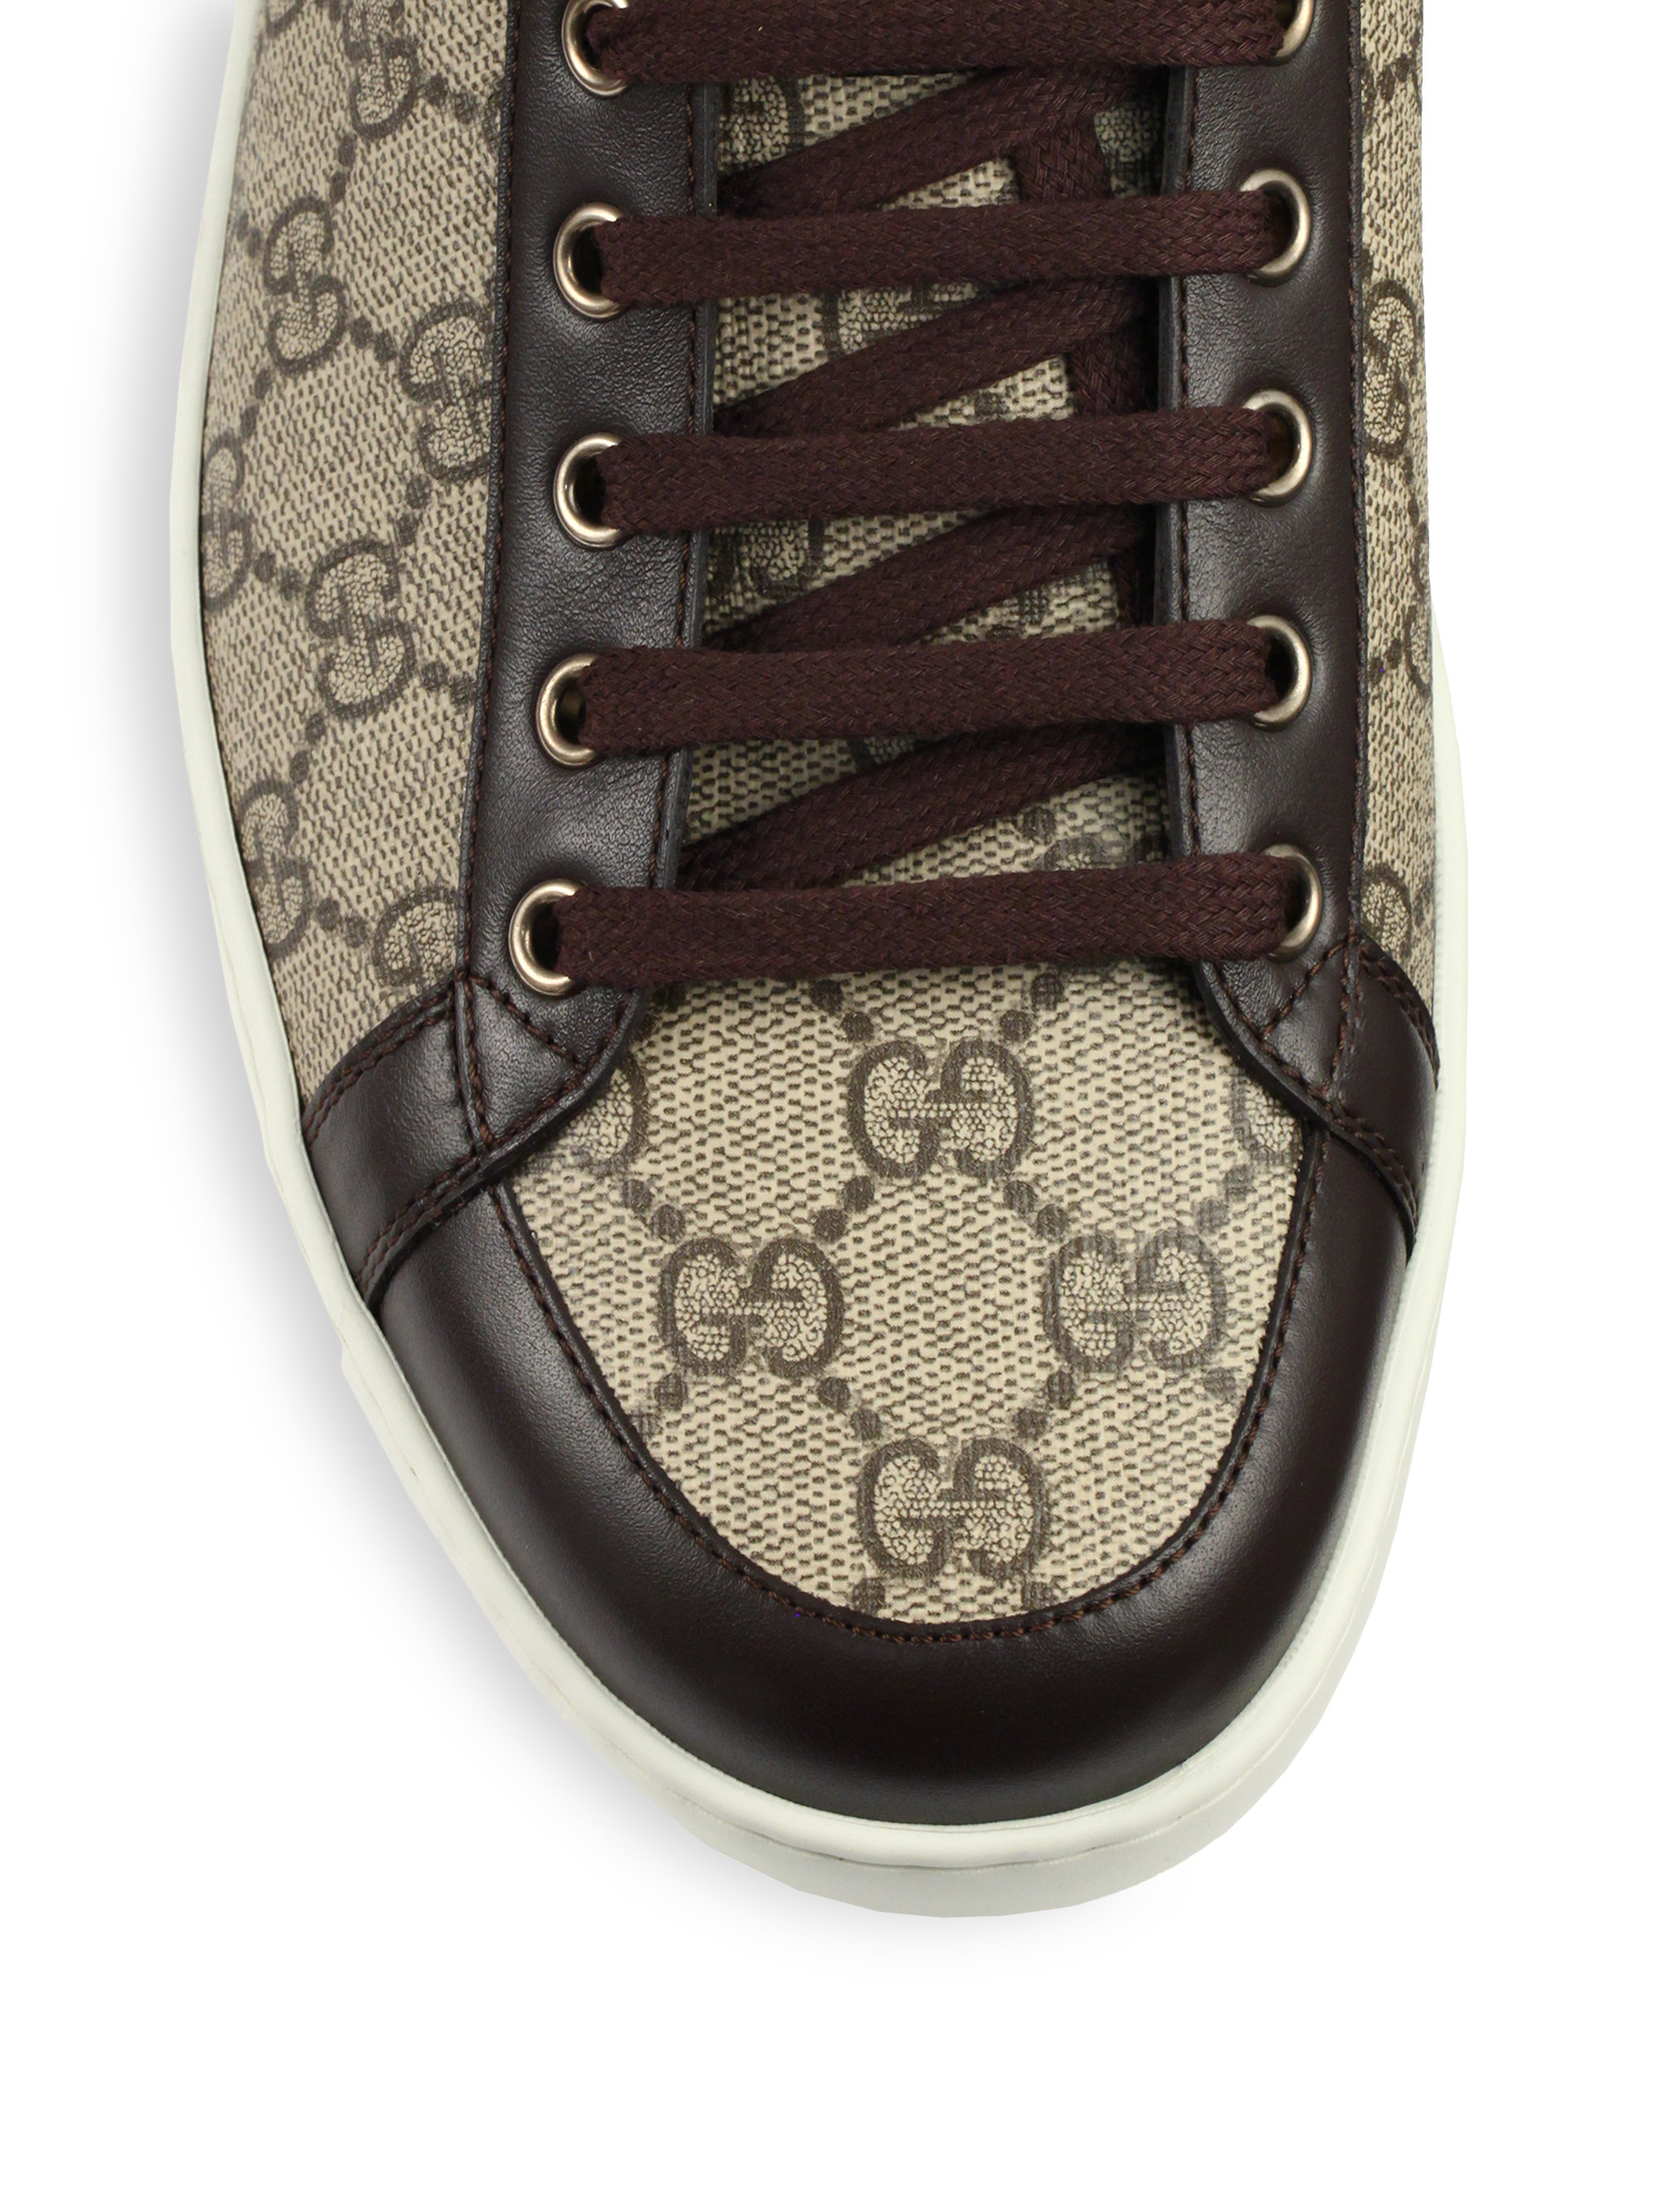 Gucci Gg Supreme Canvas High-top Sneakers in Natural for Men | Lyst